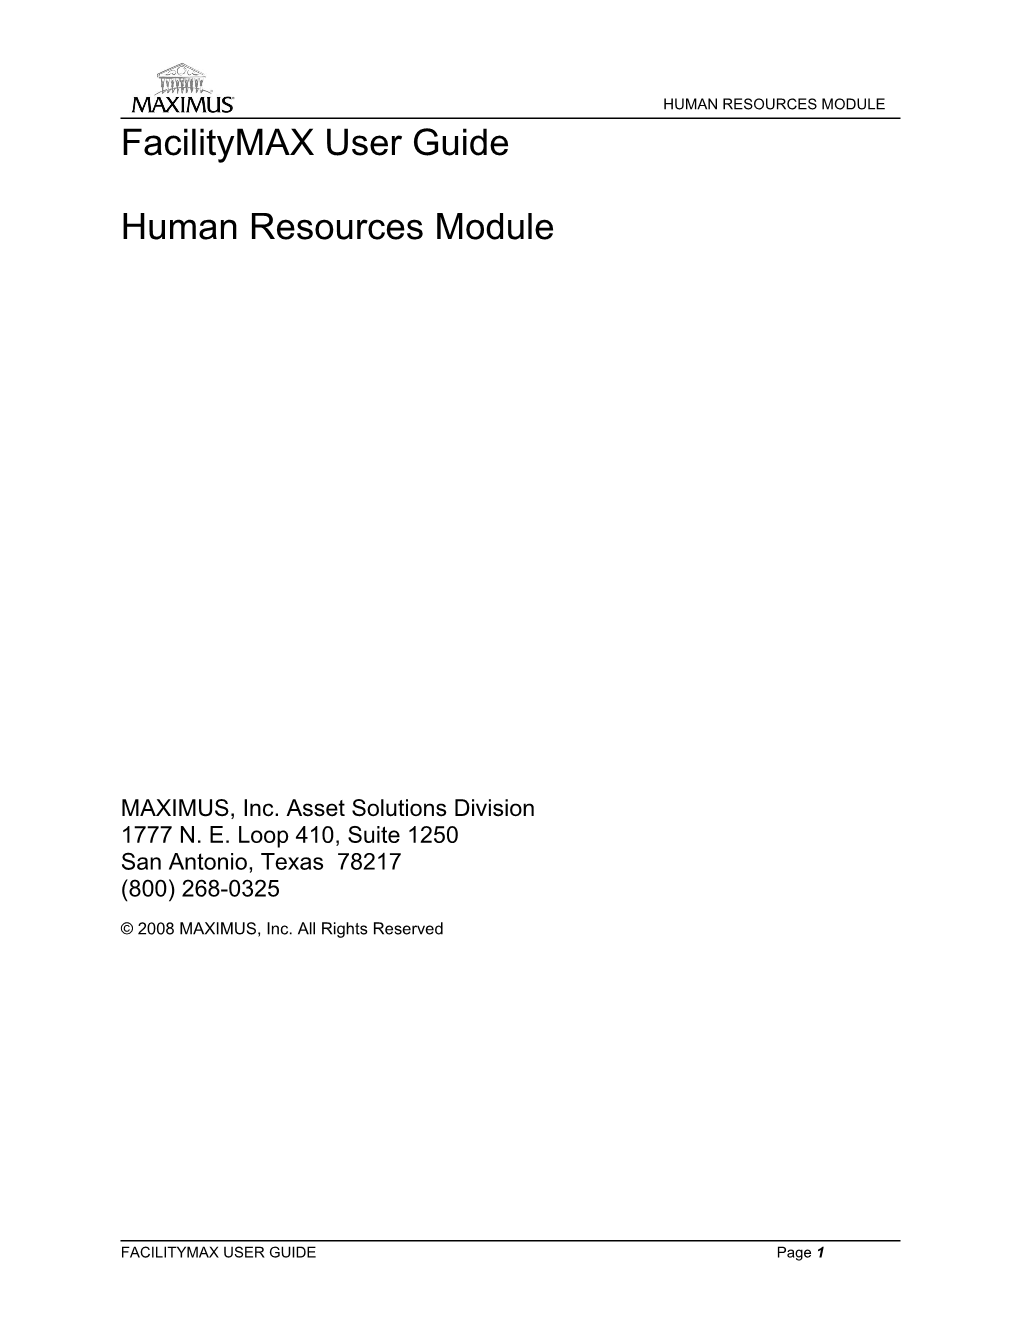 FMAX Human Resources Module User Guide